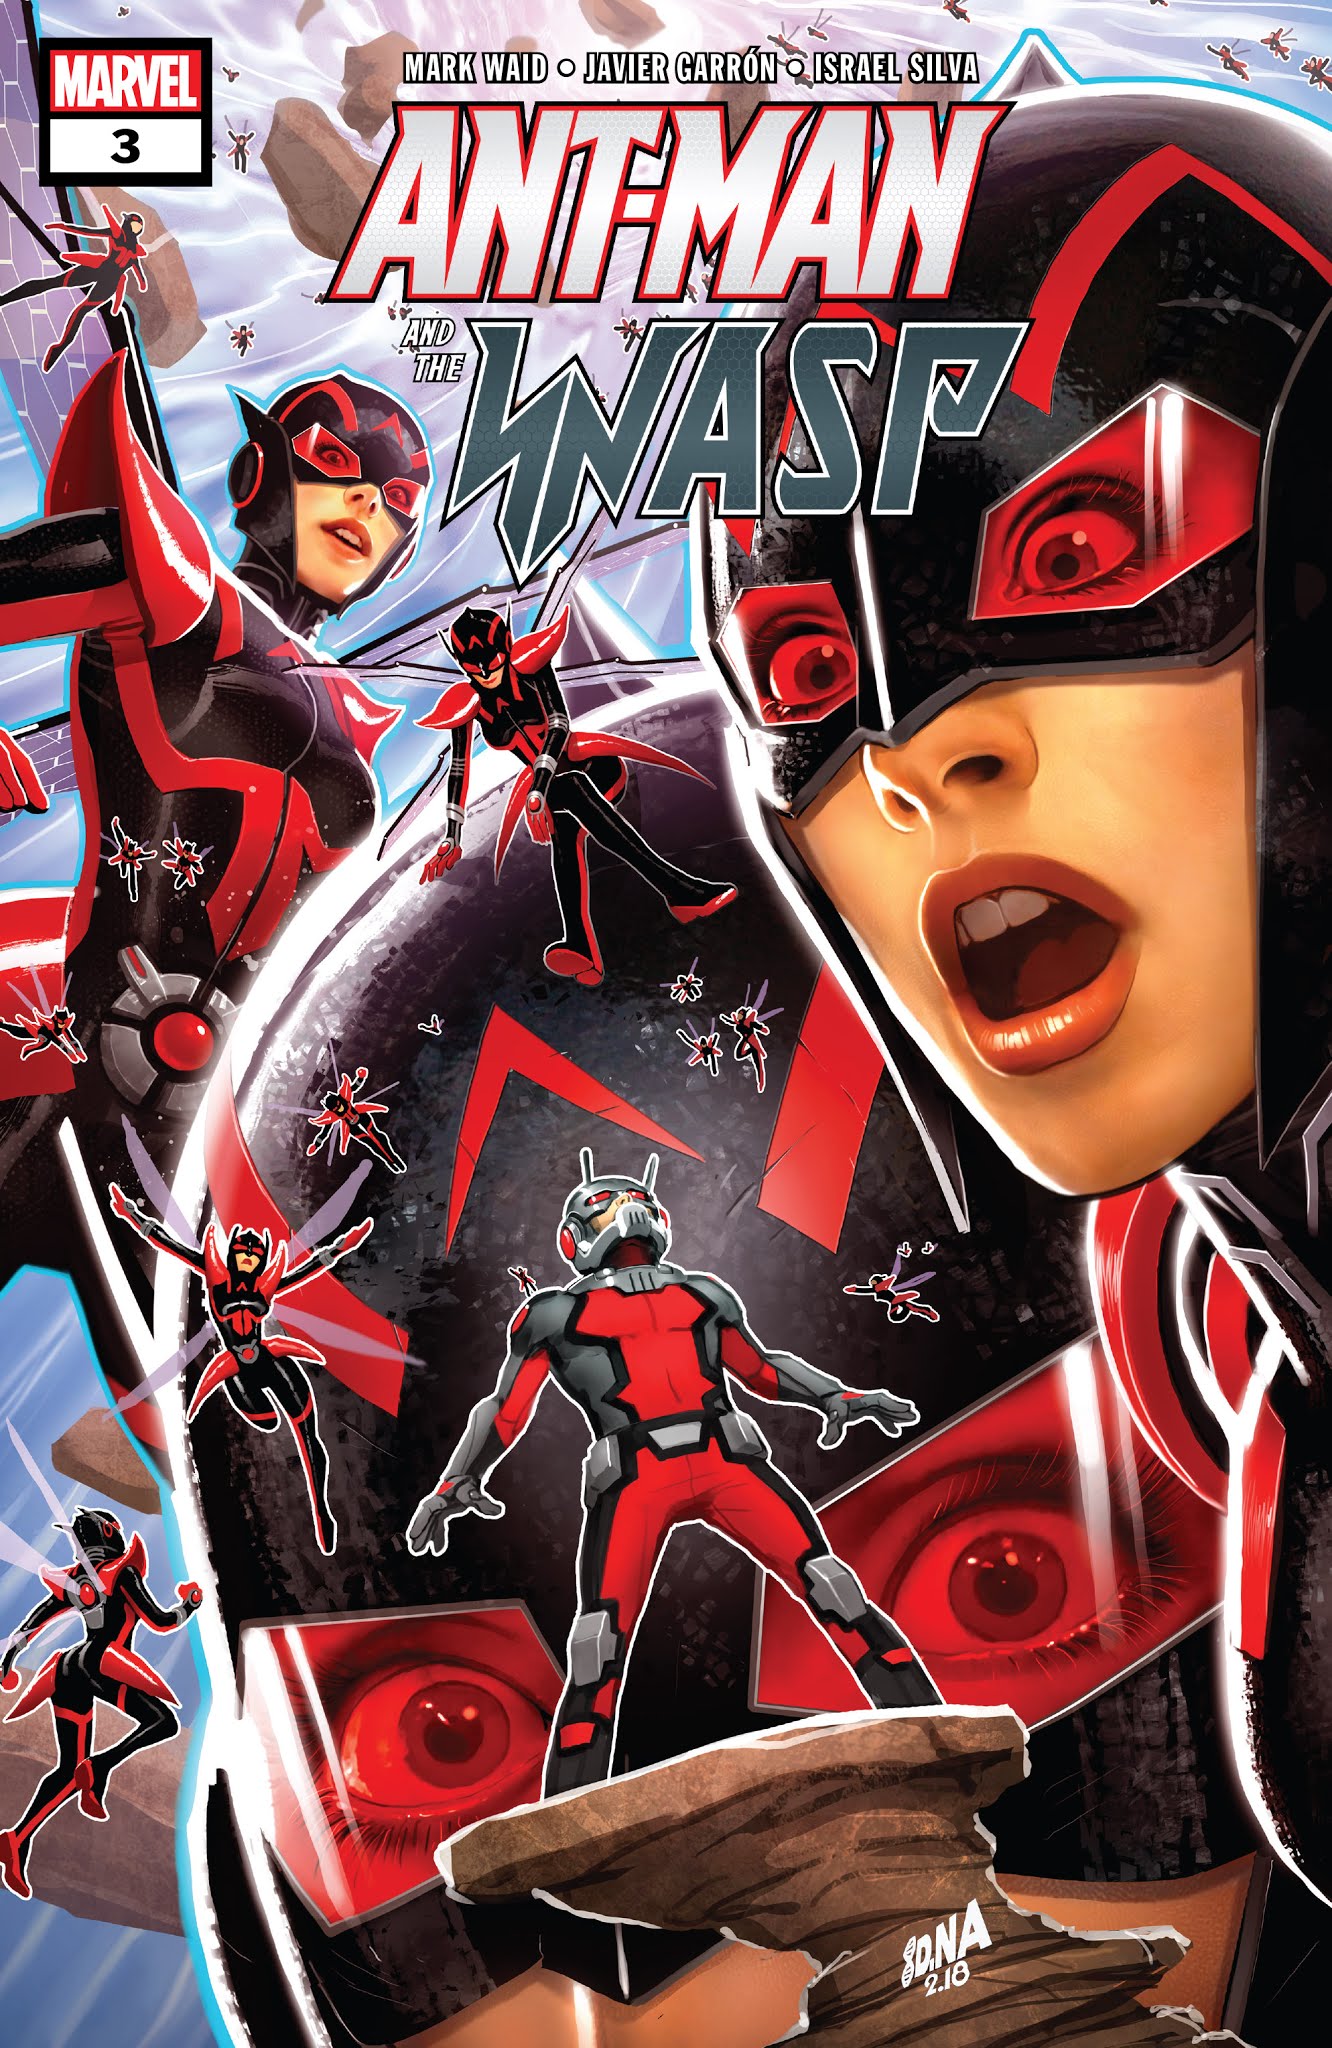 Read Waap - Ant Man The Wasp Issue 3 | Read Ant Man The Wasp Issue 3 comic online in  high quality. Read Full Comic online for free - Read comics online in high  quality .